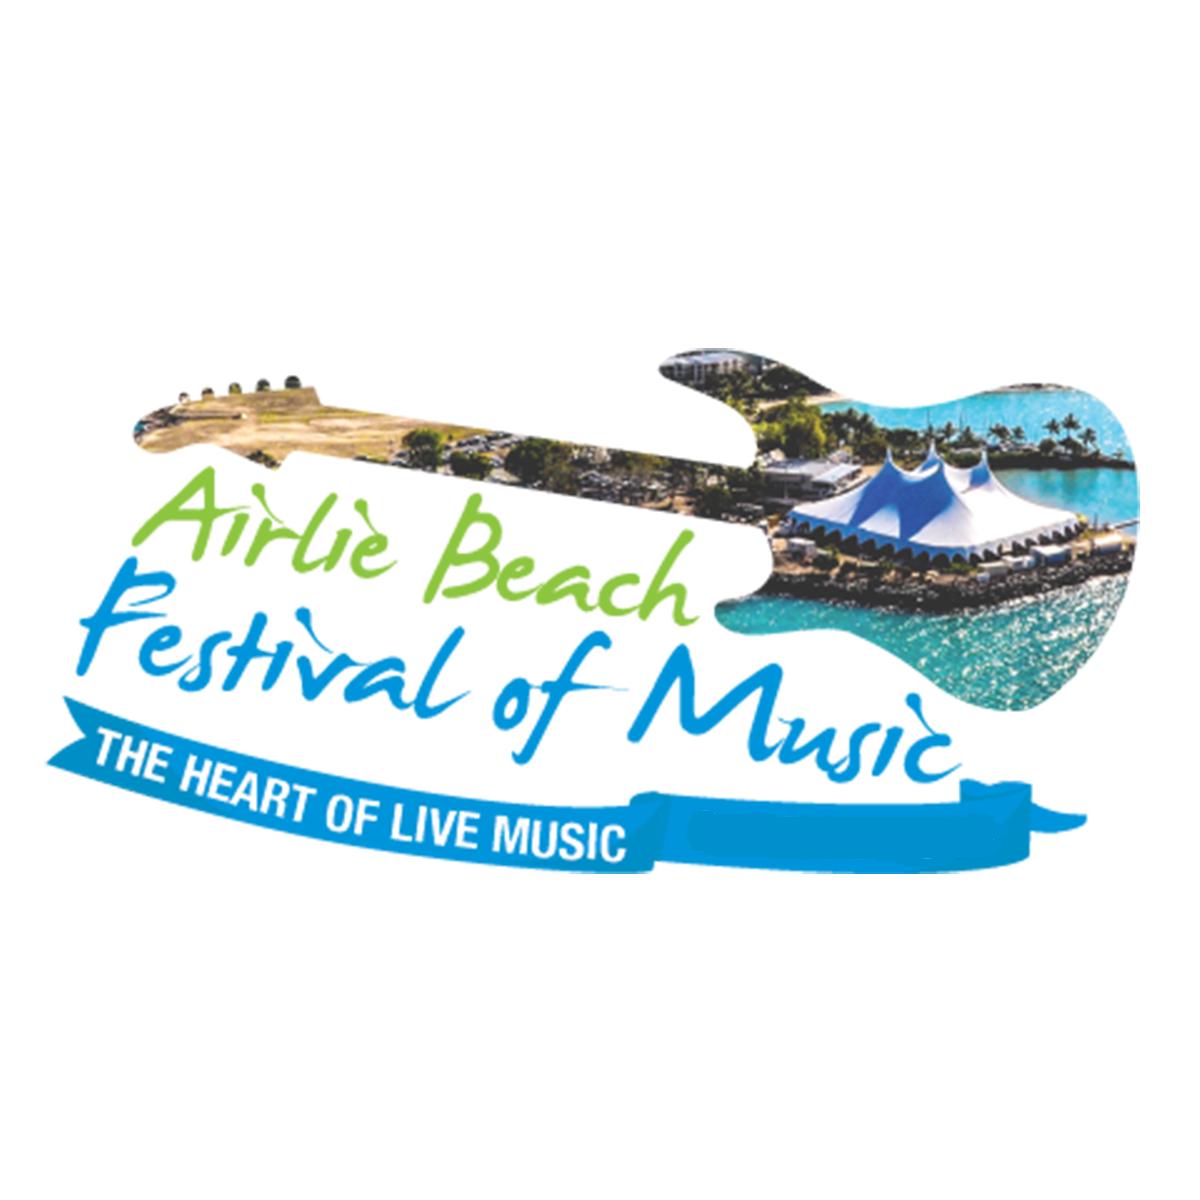 Airlie Beach Festival of Music Festival Lineup, Dates and Location